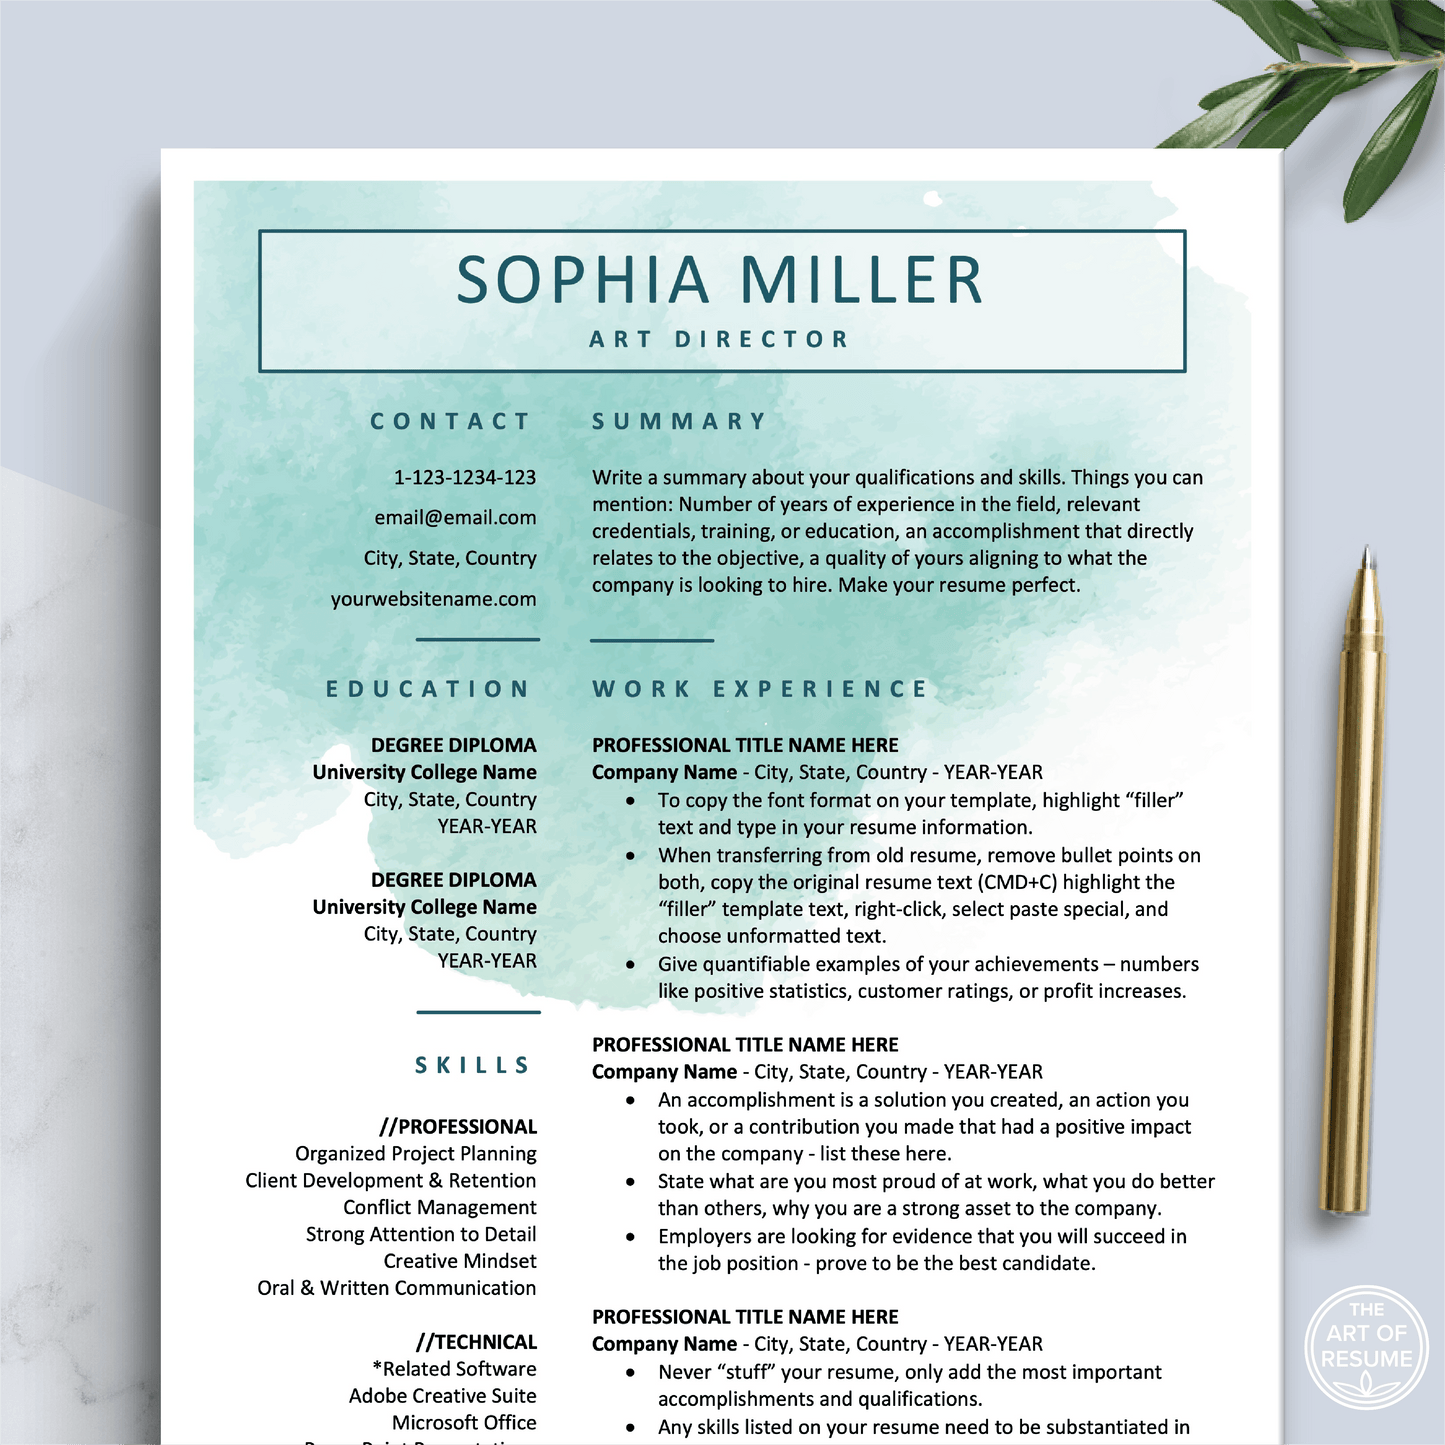 The Art of Resume Templates | Professional Rose Pink Resume CV Template | Curriculum Vitae for Apple Pages, Microsoft Word, Mac, PC